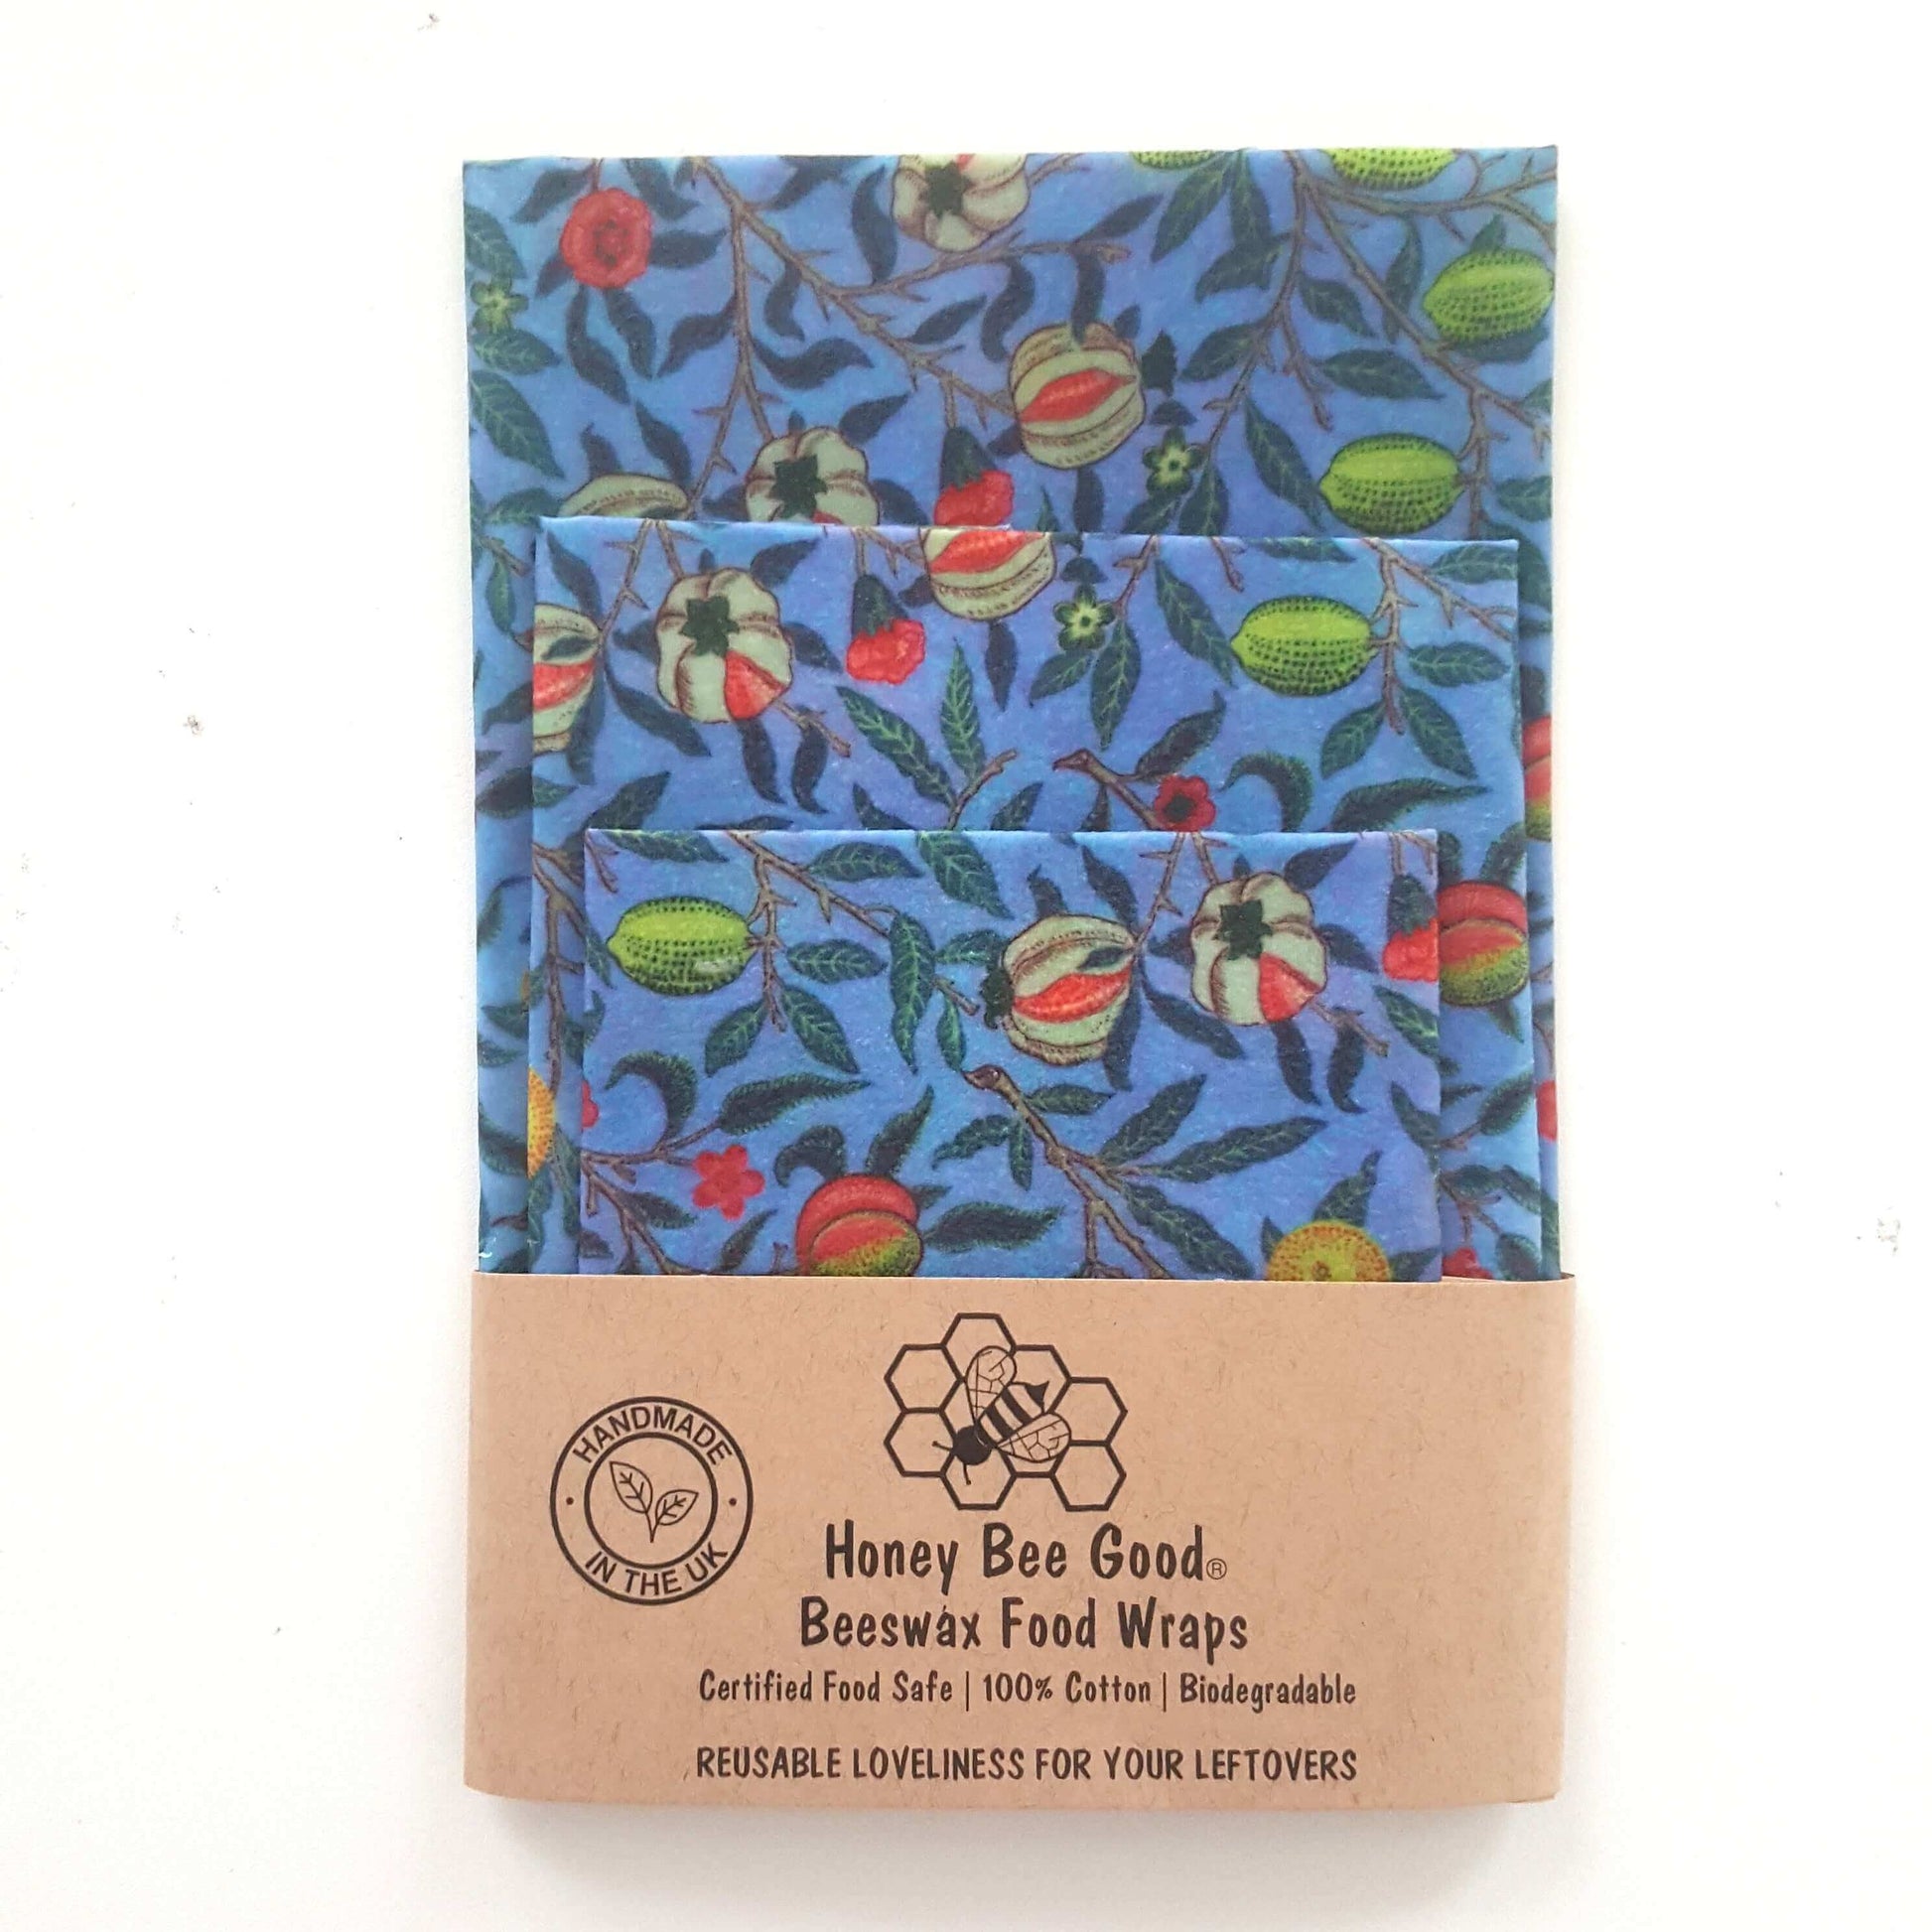 Reusable Beeswax Food Wraps 100% Hand Made in the UK by Honey Bee Good shown in William Morris Pomegranate